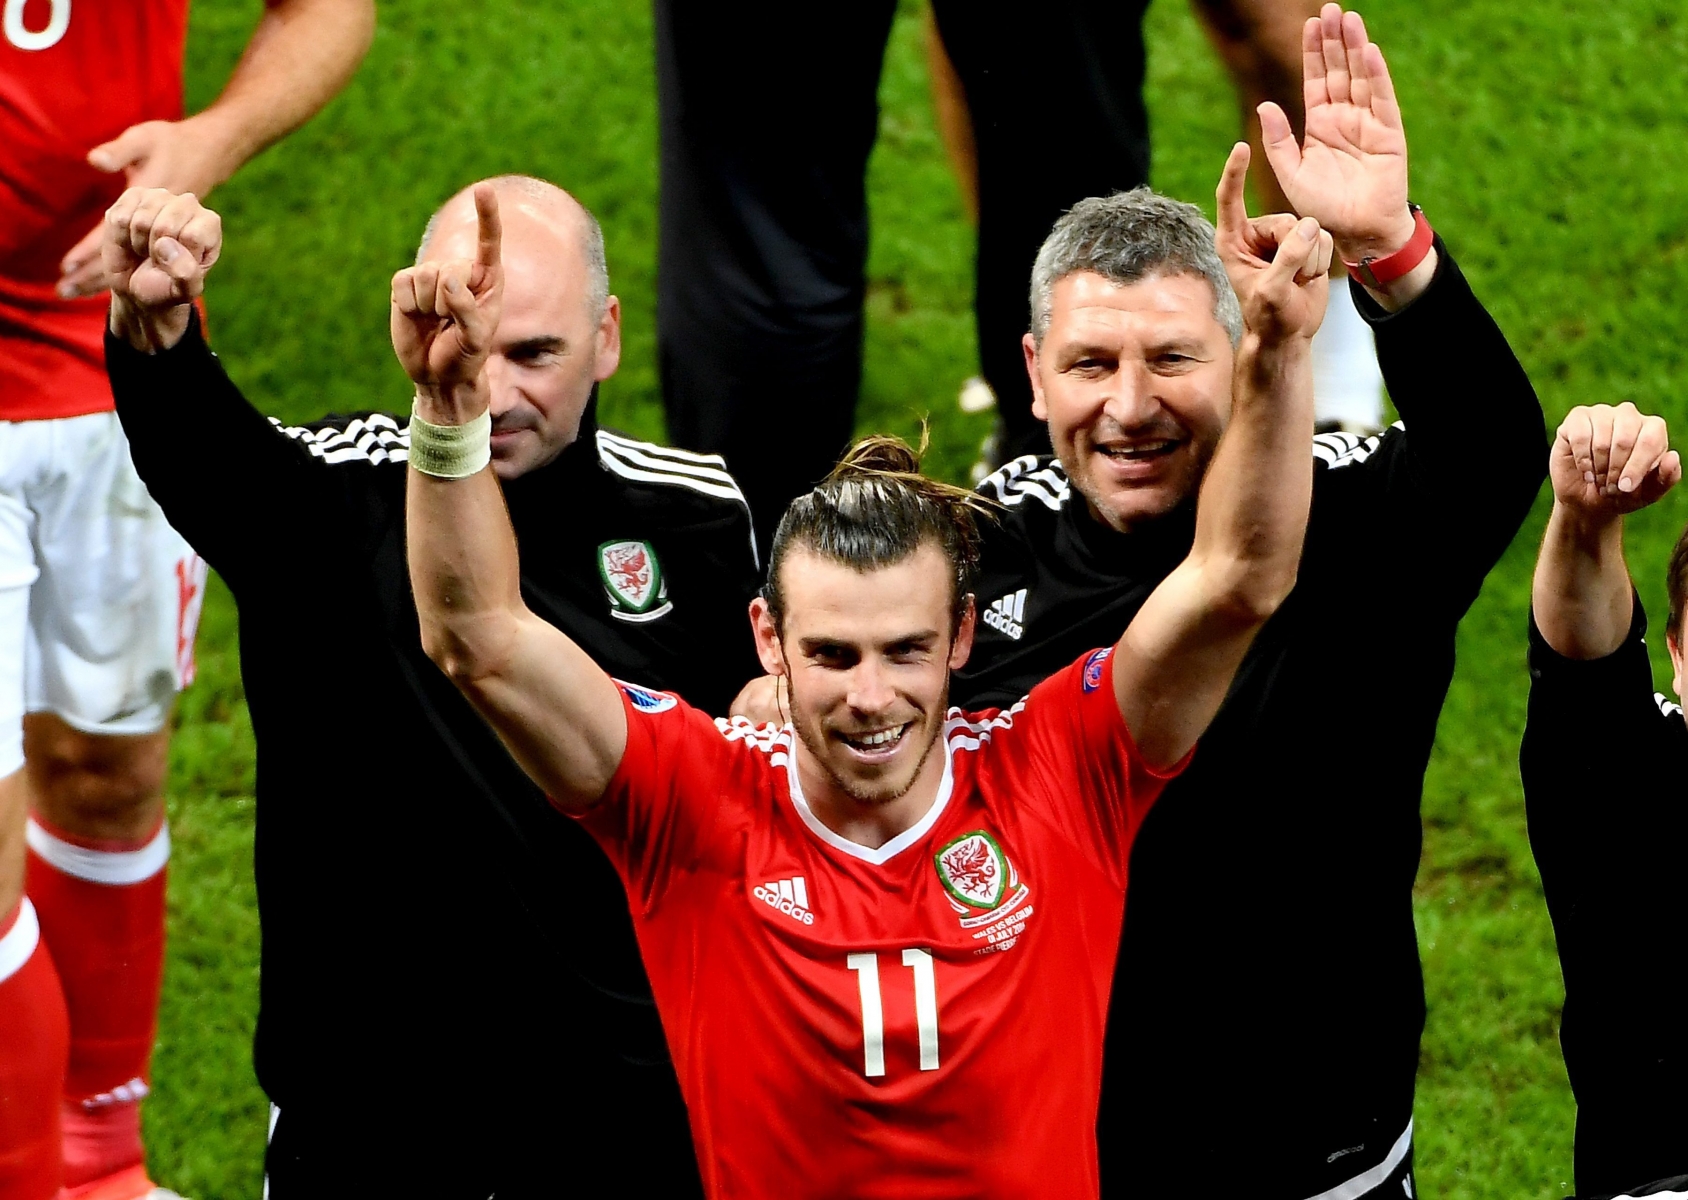 epa05402409 Gareth Bale of Wales reacts after the UEFA EURO 2016 quarter final match between Wales and Belgium at Stade Pierre Mauroy in Lille Metropole, France, 01 July 2016. Wales won 3-1.....(RESTRICTIONS APPLY: For editorial news reporting purposes only. Not used for commercial or marketing purposes without prior written approval of UEFA. Images must appear as still images and must not emulate match action video footage. Photographs published in online publications (whether via the Internet or otherwise) shall have an interval of at least 20 seconds between the posting.)  EPA/FILIP SINGER   EDITORIAL USE ONLY FRANCE SOCCER UEFA EURO 2016